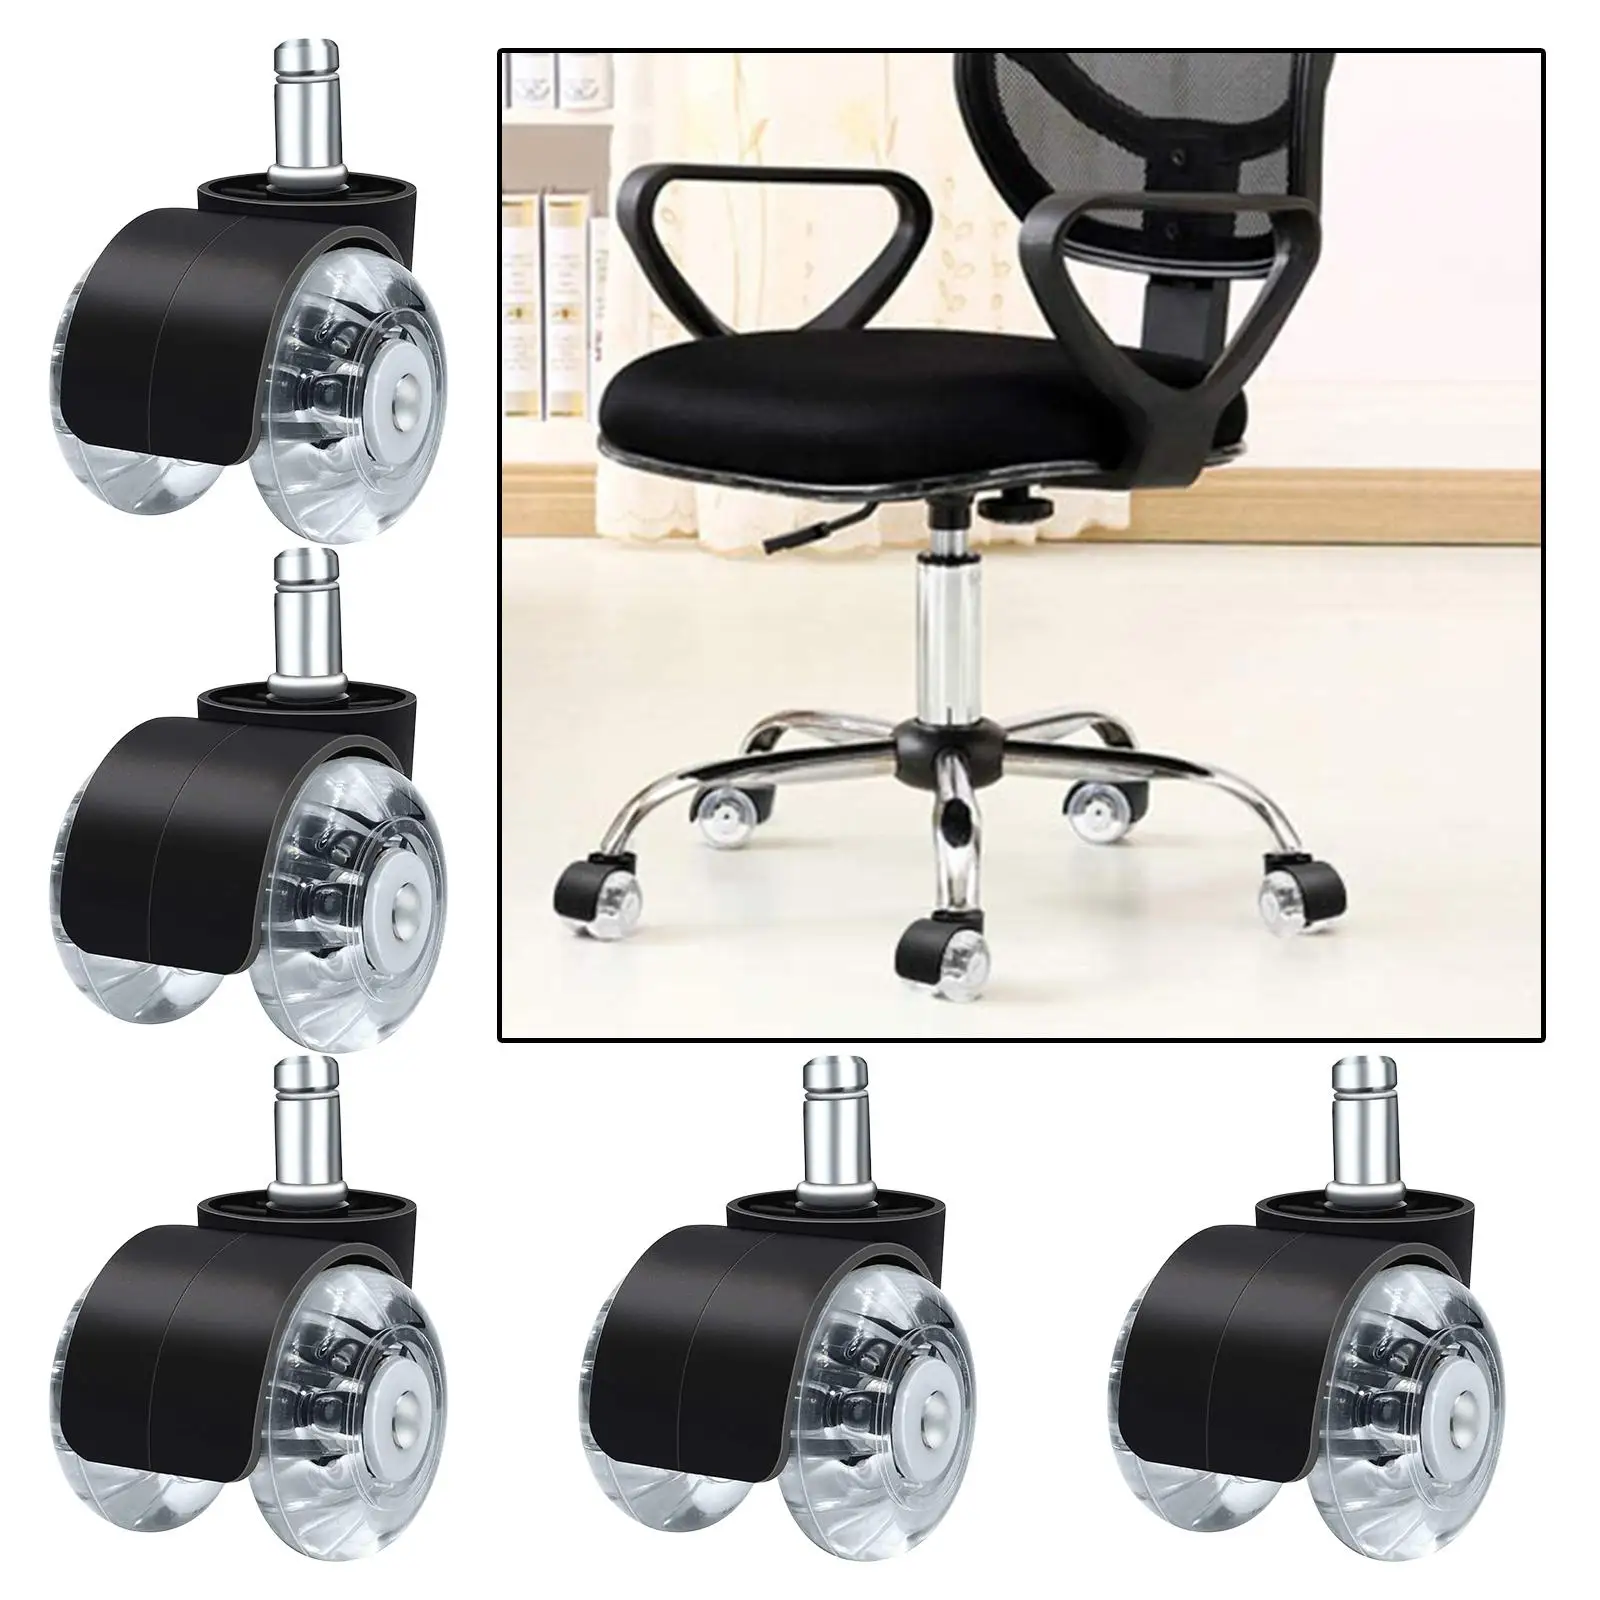 Set of 5 Replacement Computer Swivel Caster PU Wheels Roller